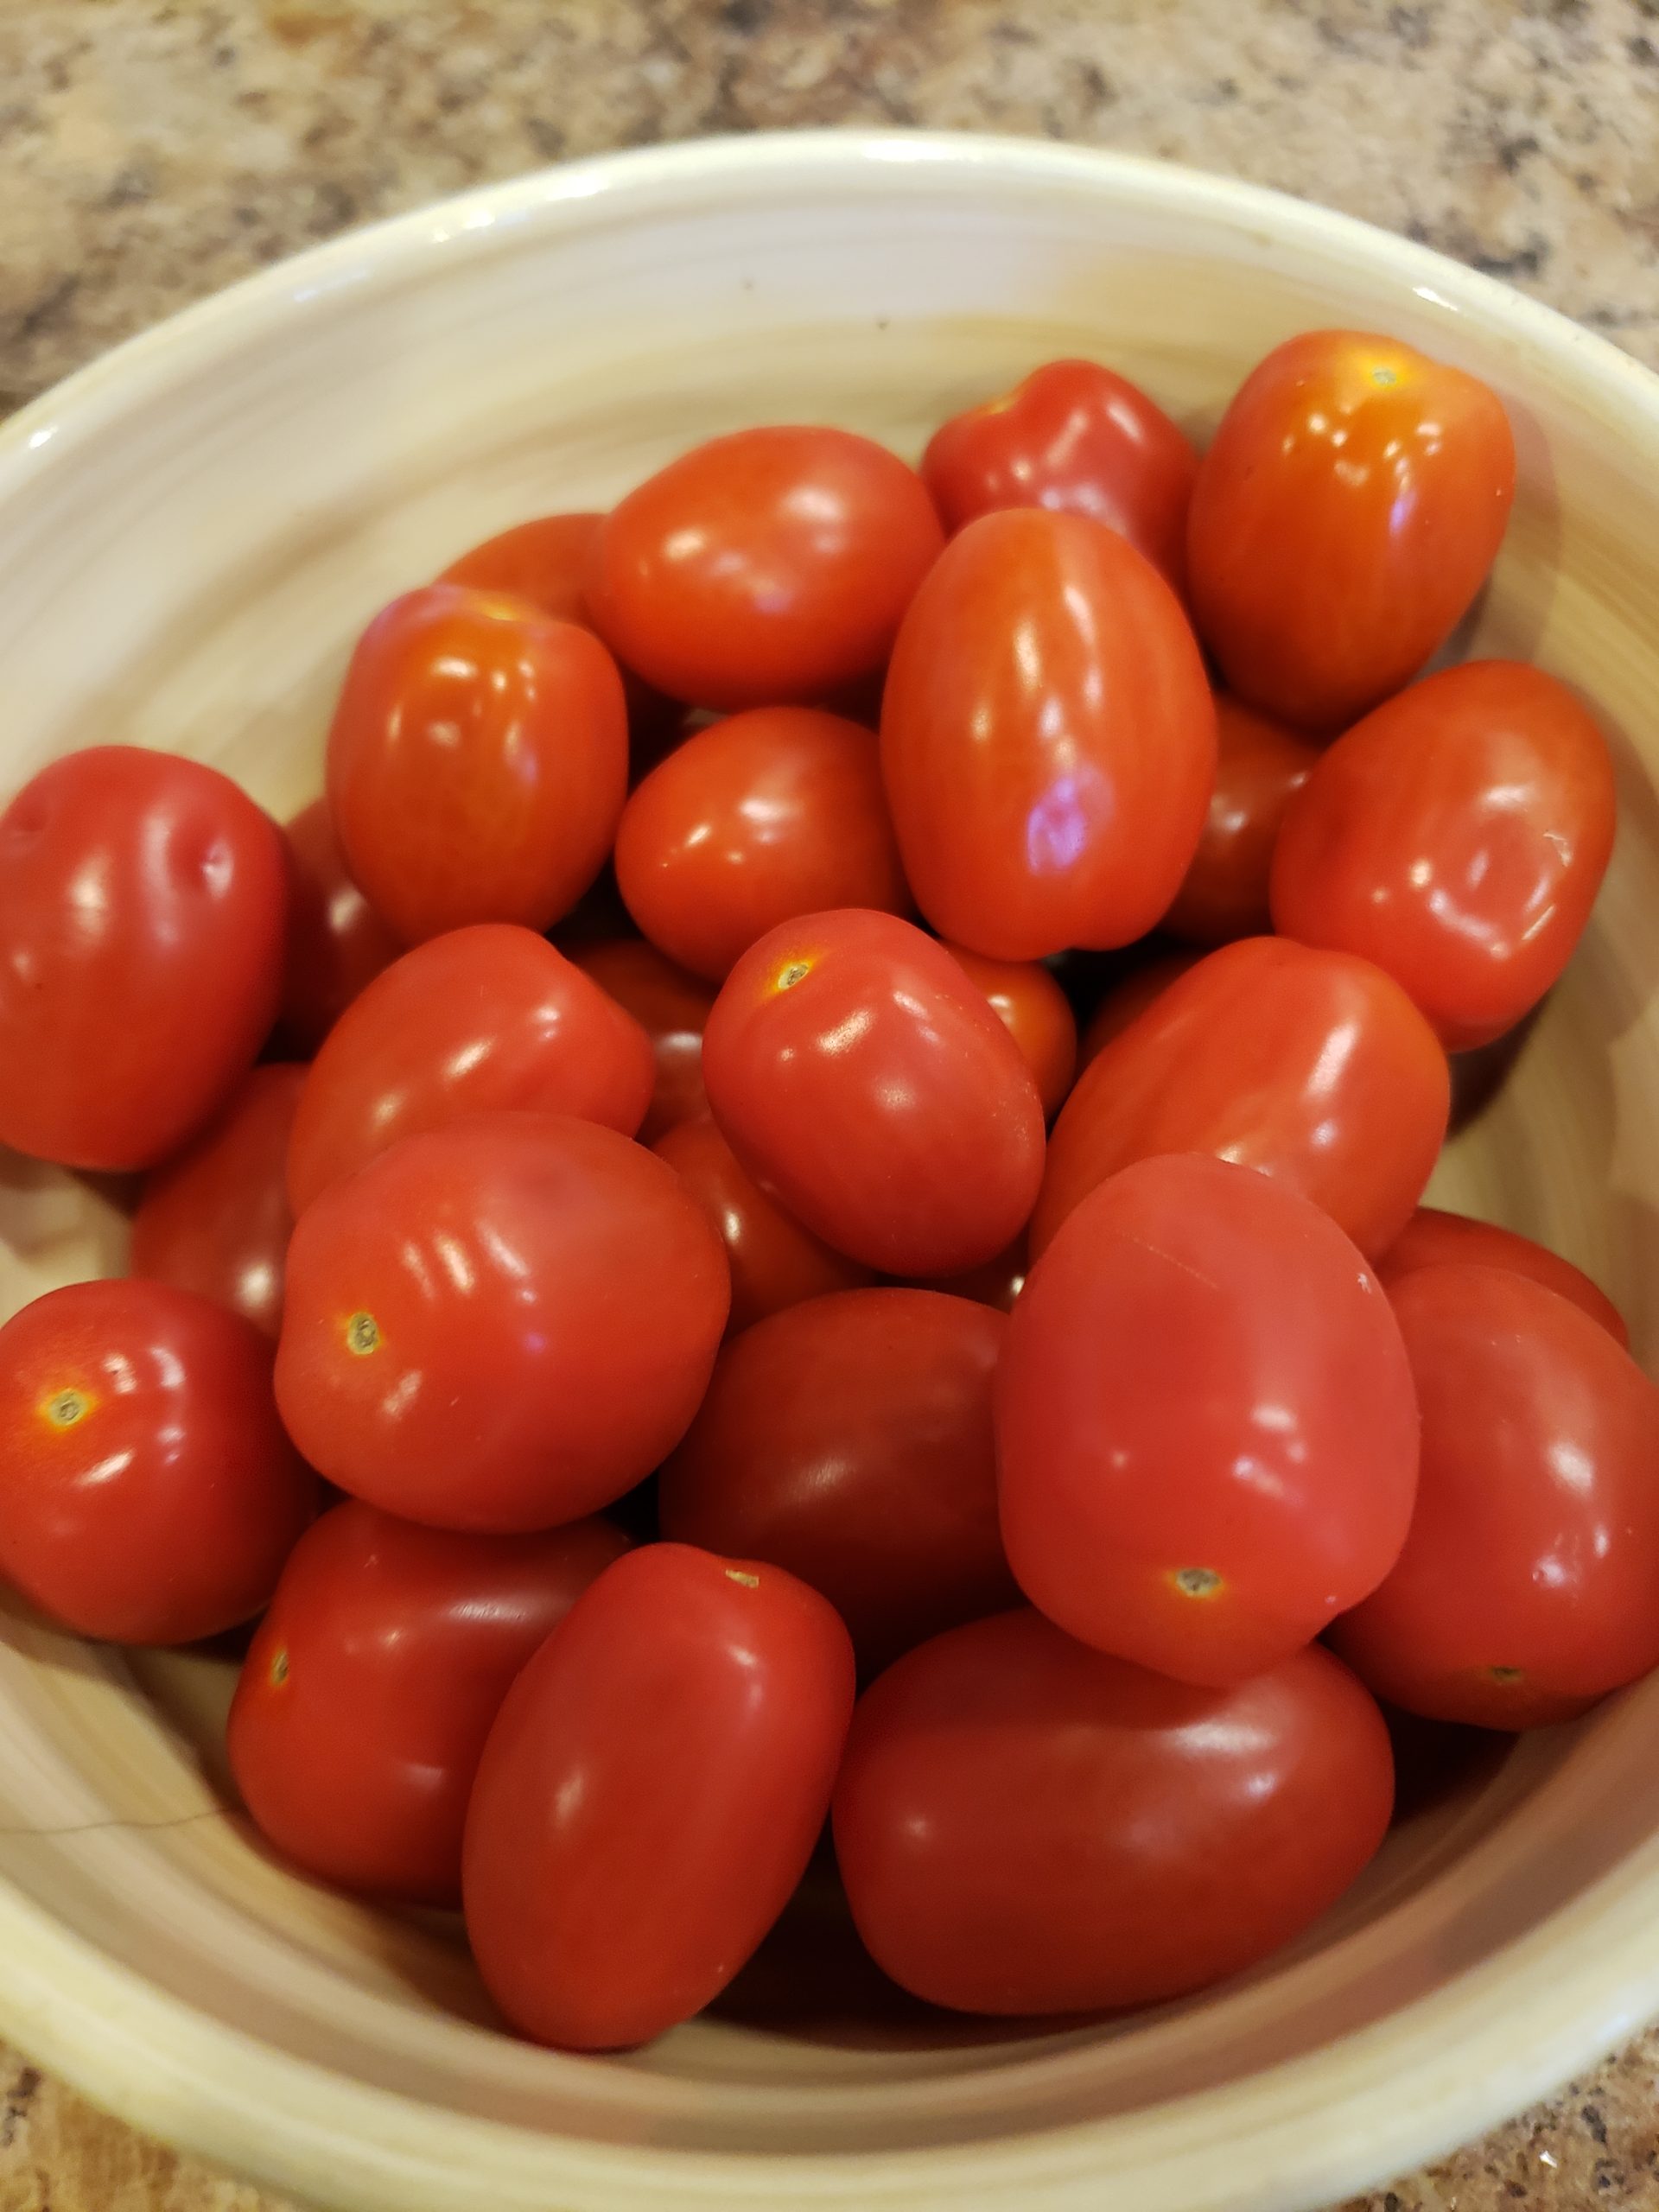 Lycopene-rich tomatoes does more than improving athletic performance. Its superior antioxidant effect provides numerous health benefits. Eye health: Tomatoes also contain beta-carotene, lutein, and zeaxanthin. These phytonutrients have been shown to promote healthy vision and reduce the risk of degeneration.